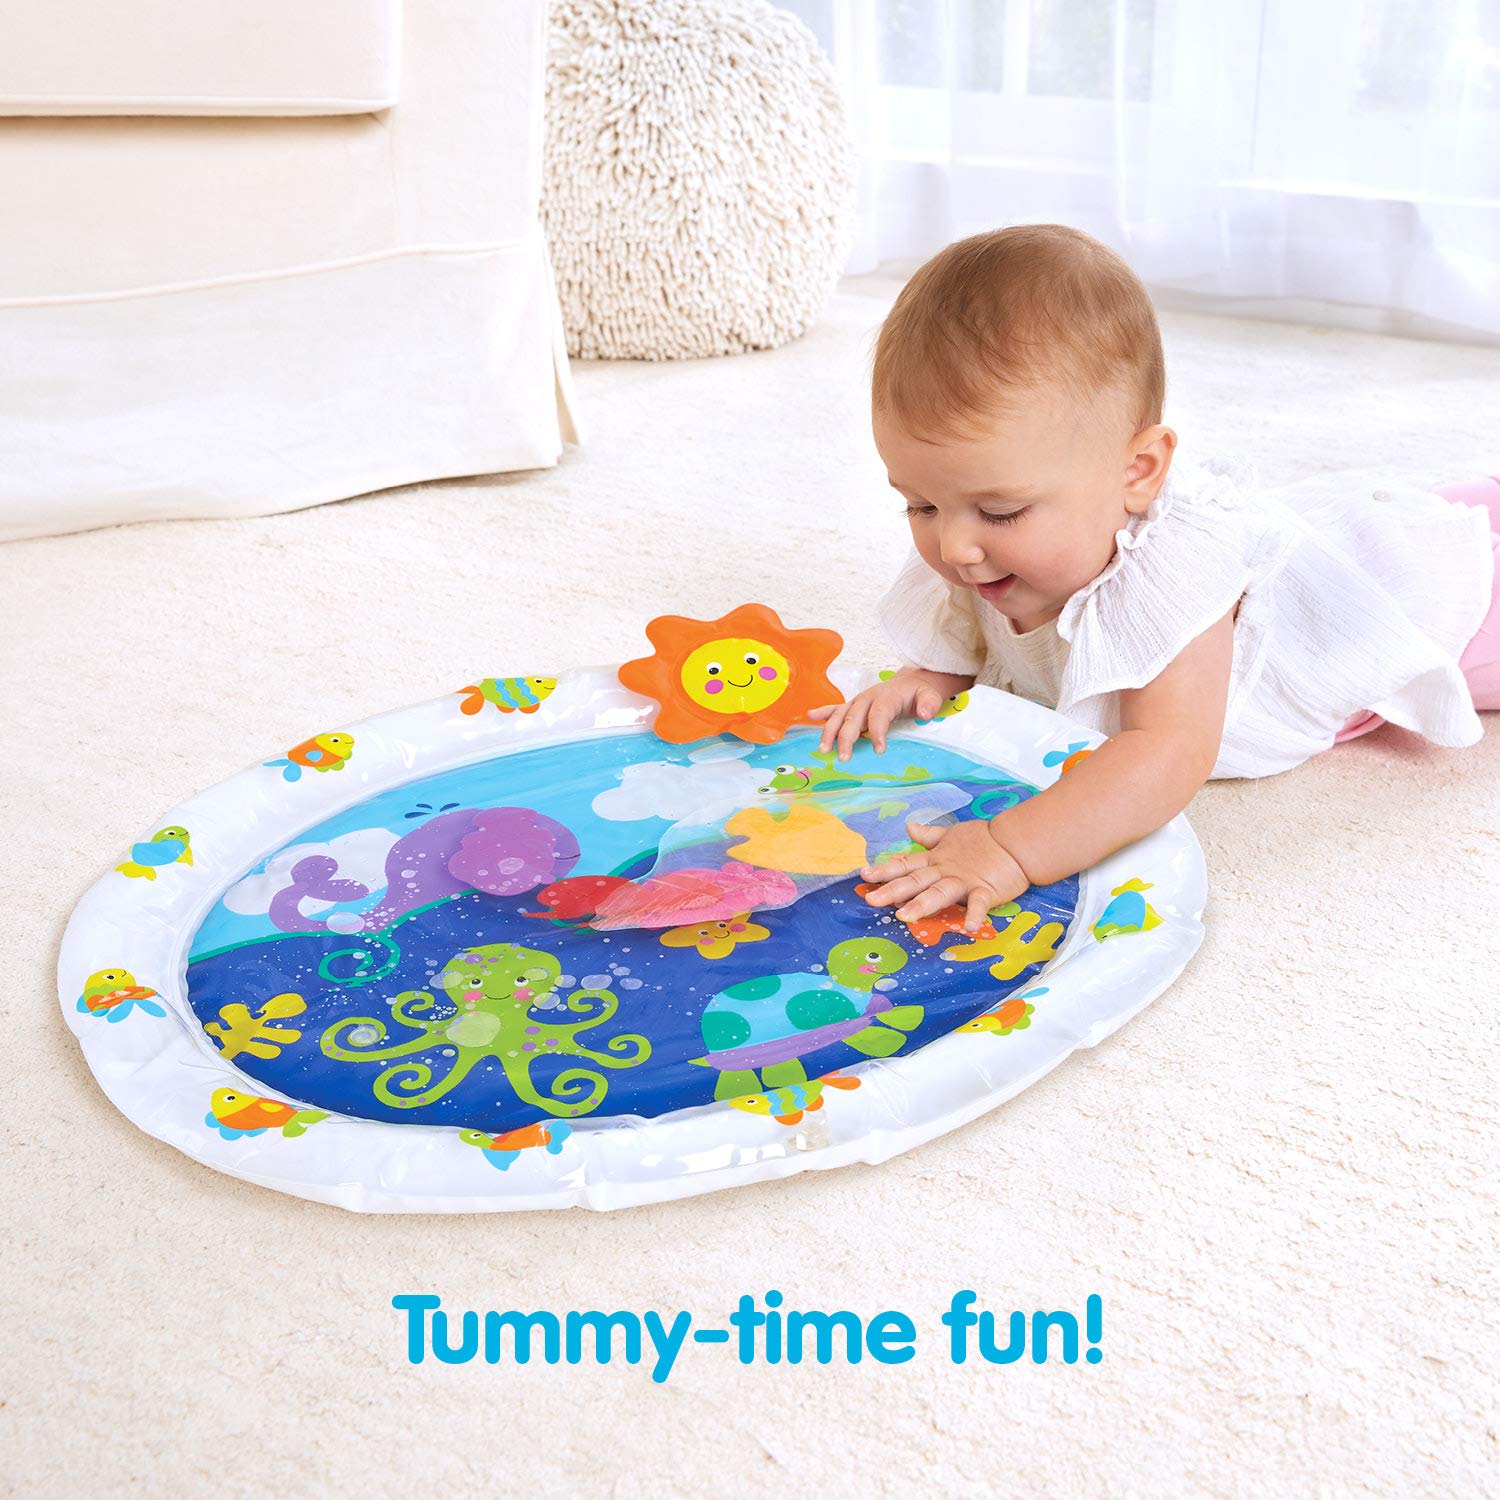 Kidoozie Pat 'n Laugh Water Mat for Infants and Toddlers Ages 3-18 Months; Encourage Tummy Time with 6 Fun Floating Sea Friends to Discover